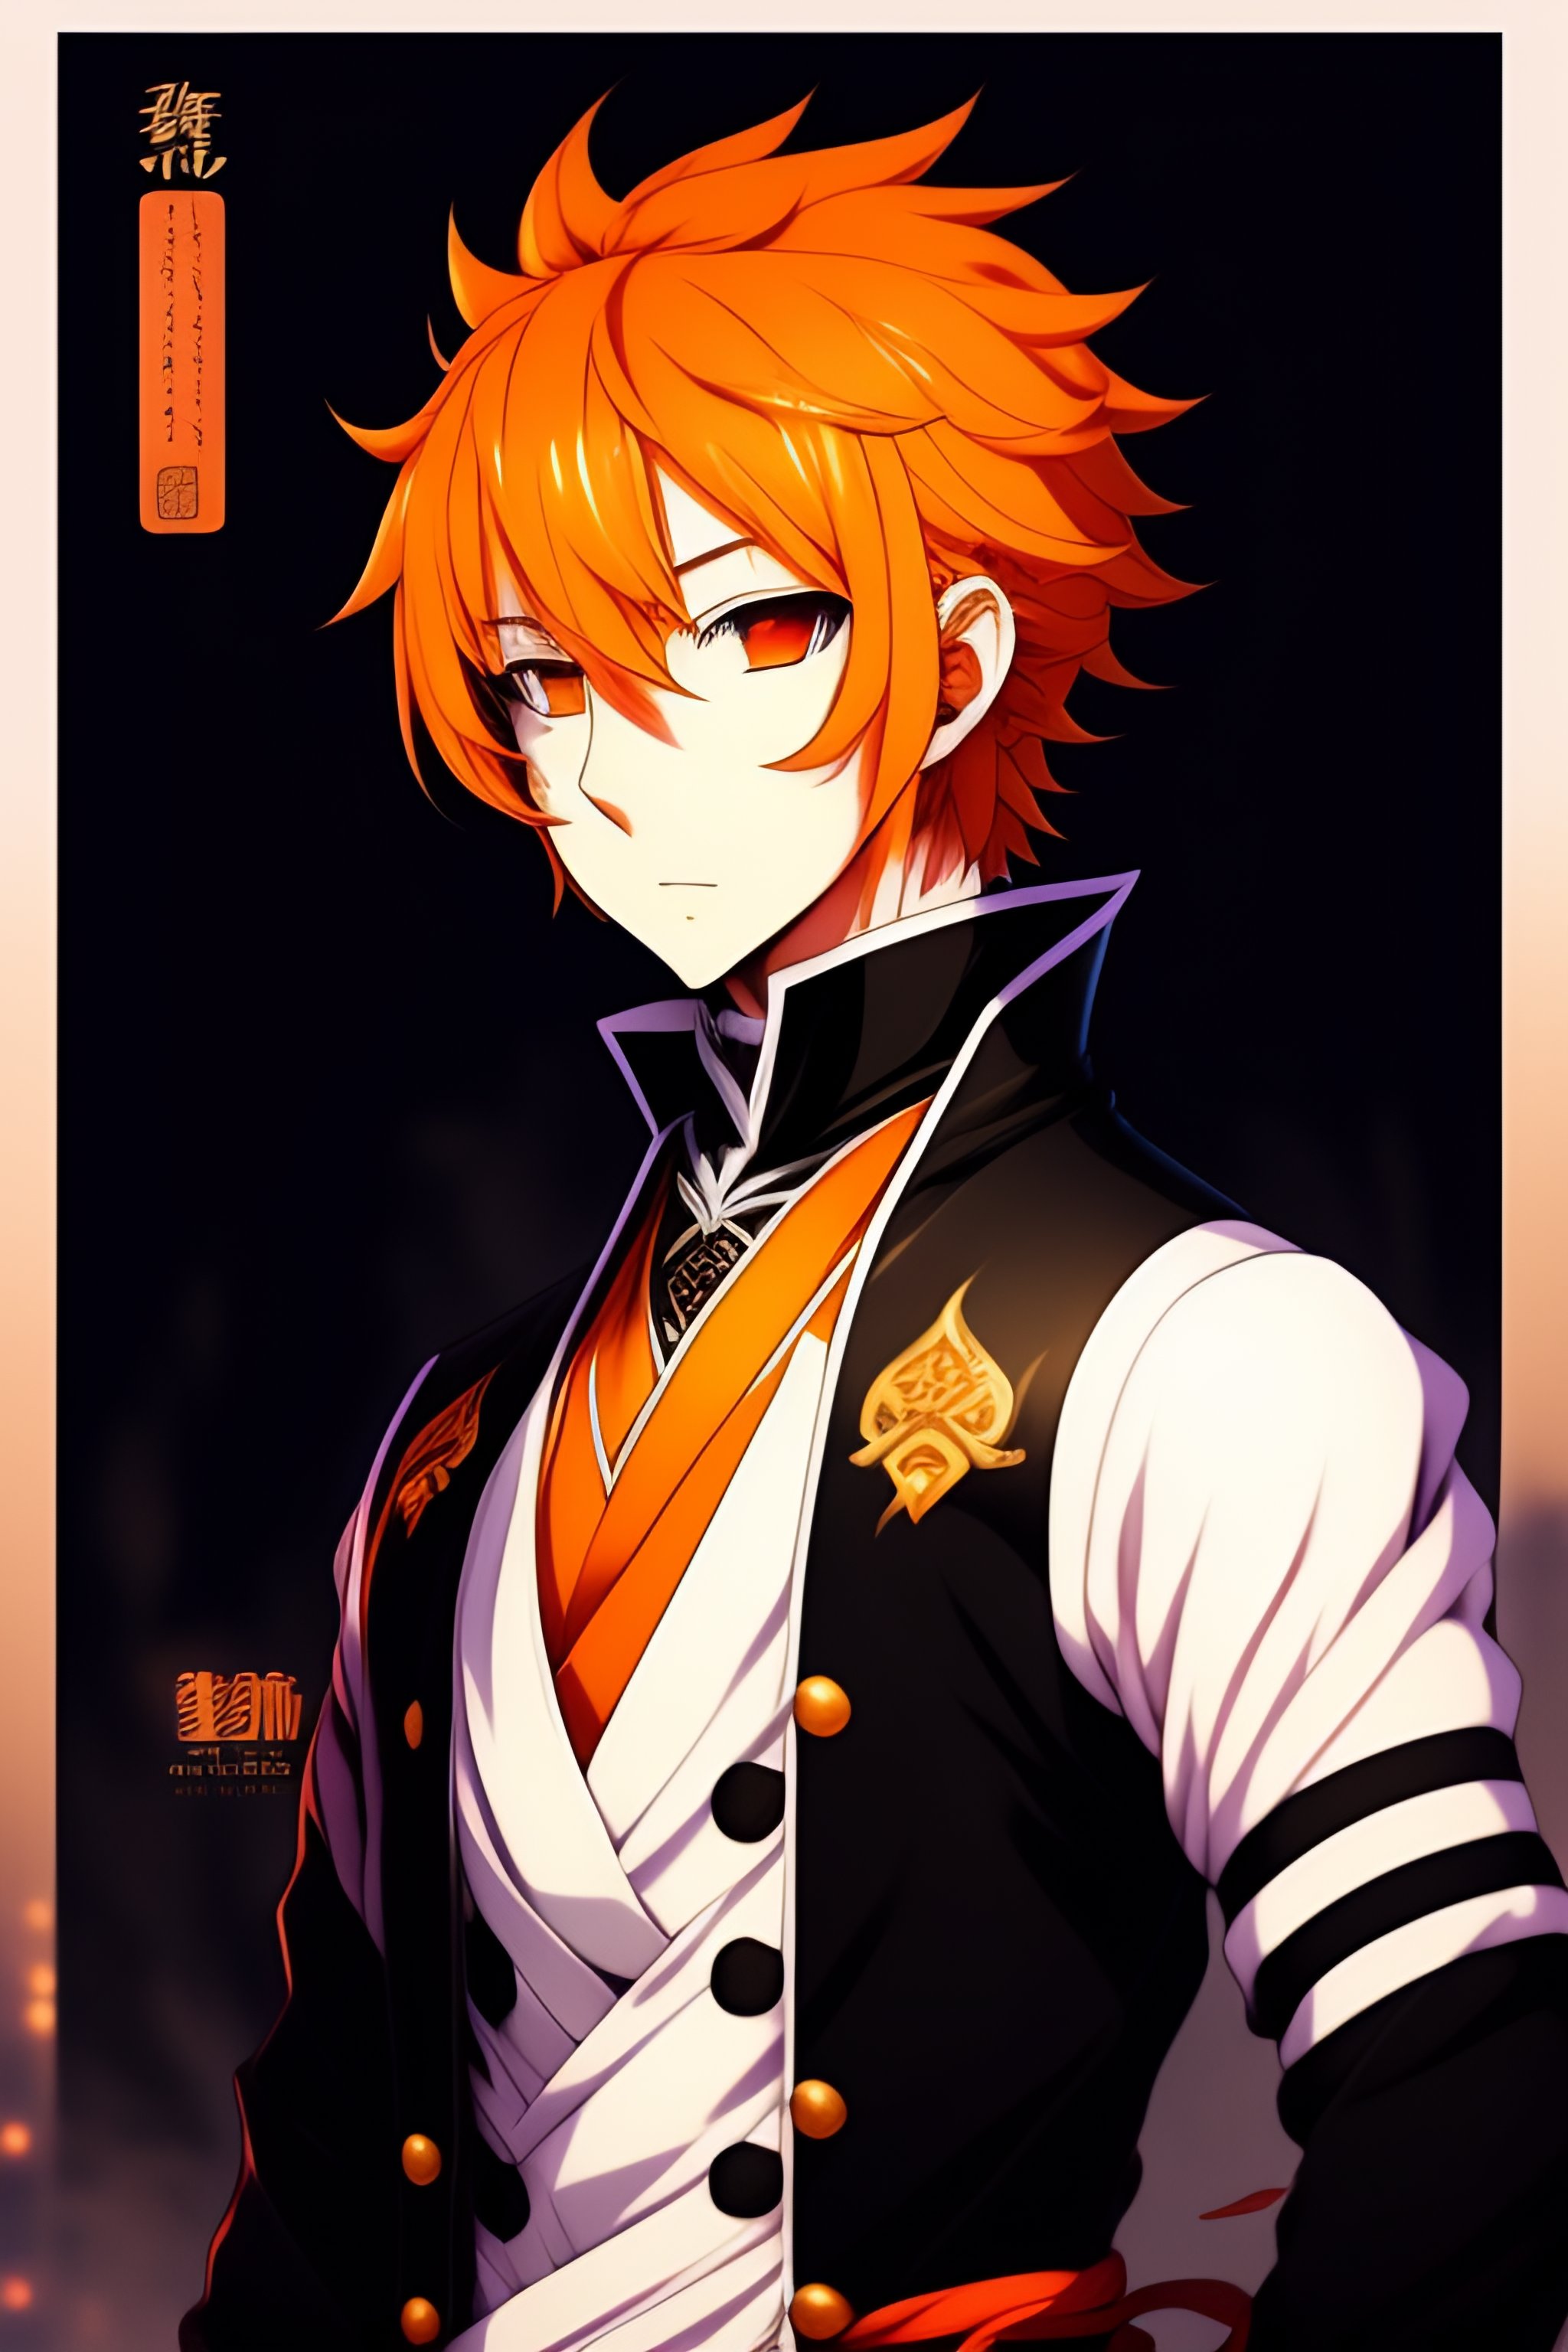 anime guy with orange and white hair